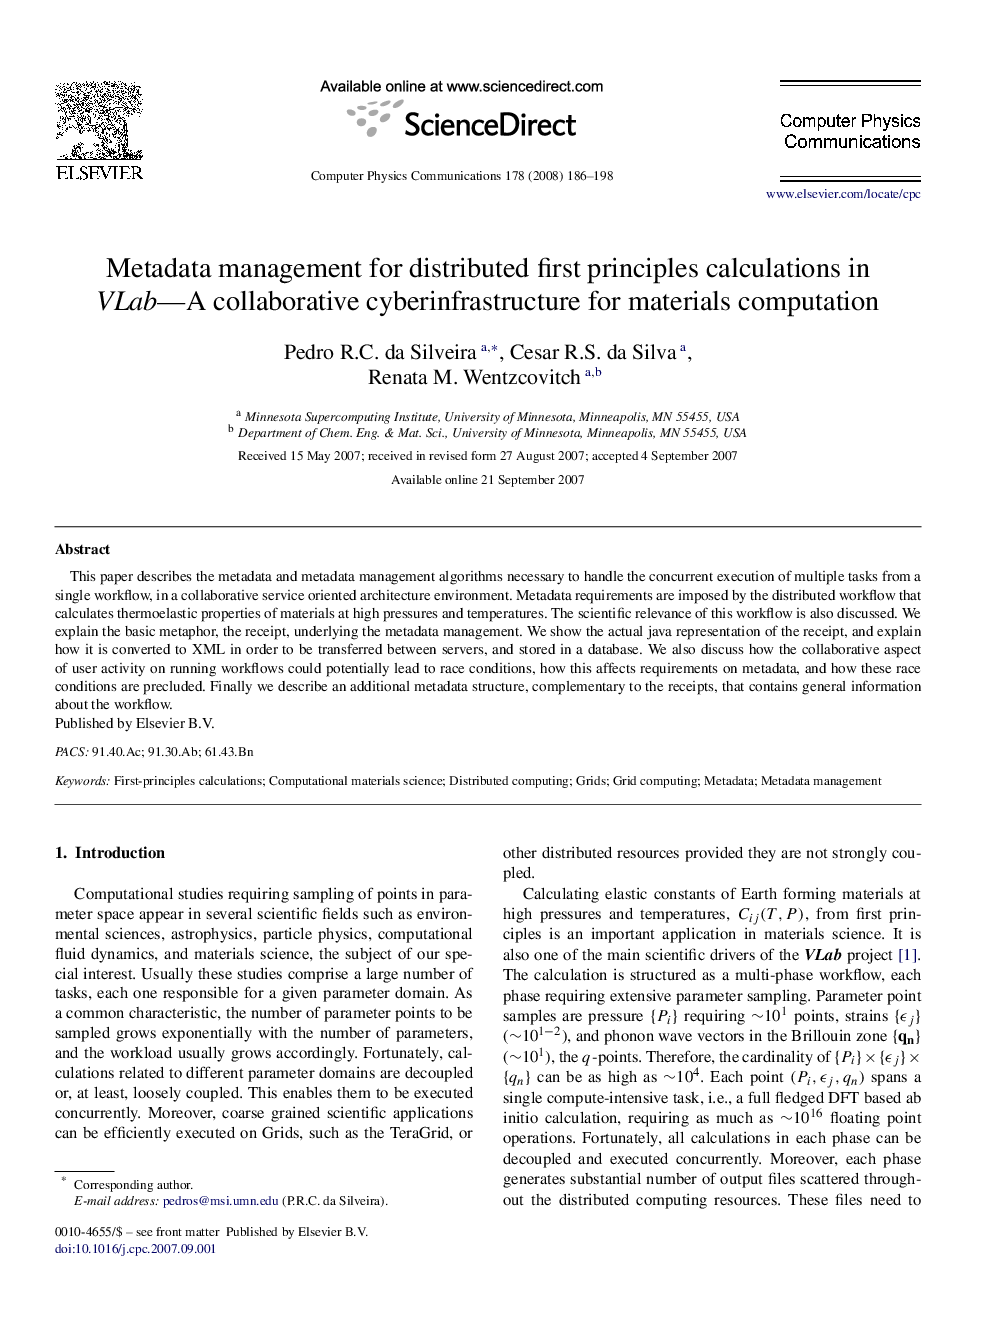 Metadata management for distributed first principles calculations in VLab—A collaborative cyberinfrastructure for materials computation